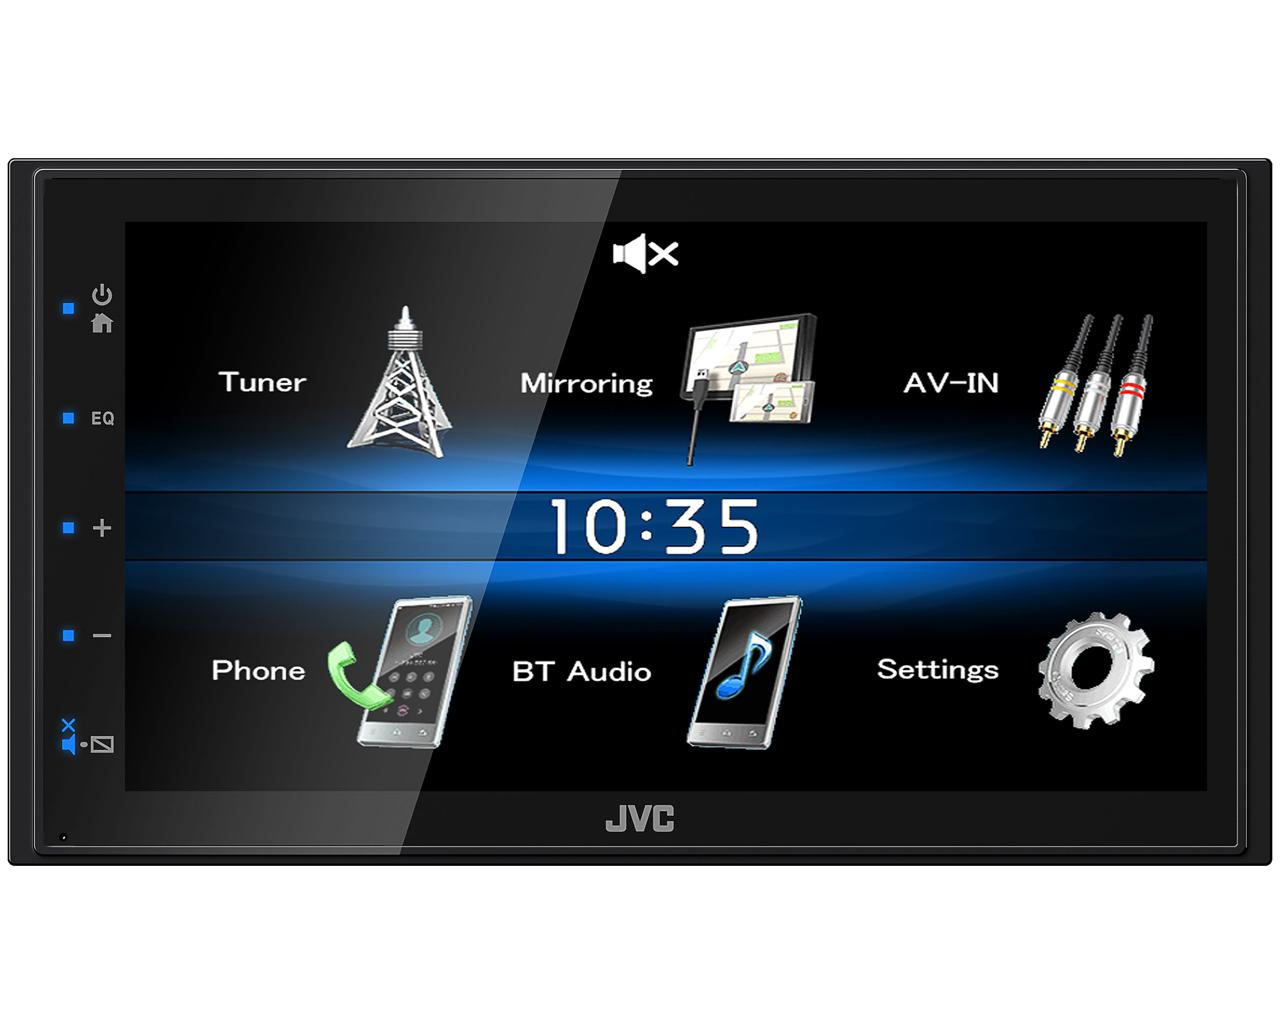 JVC KW-M25BT 2DIN, Mechless, multimedia systeem. Geschikt voor USB mirroring for Android